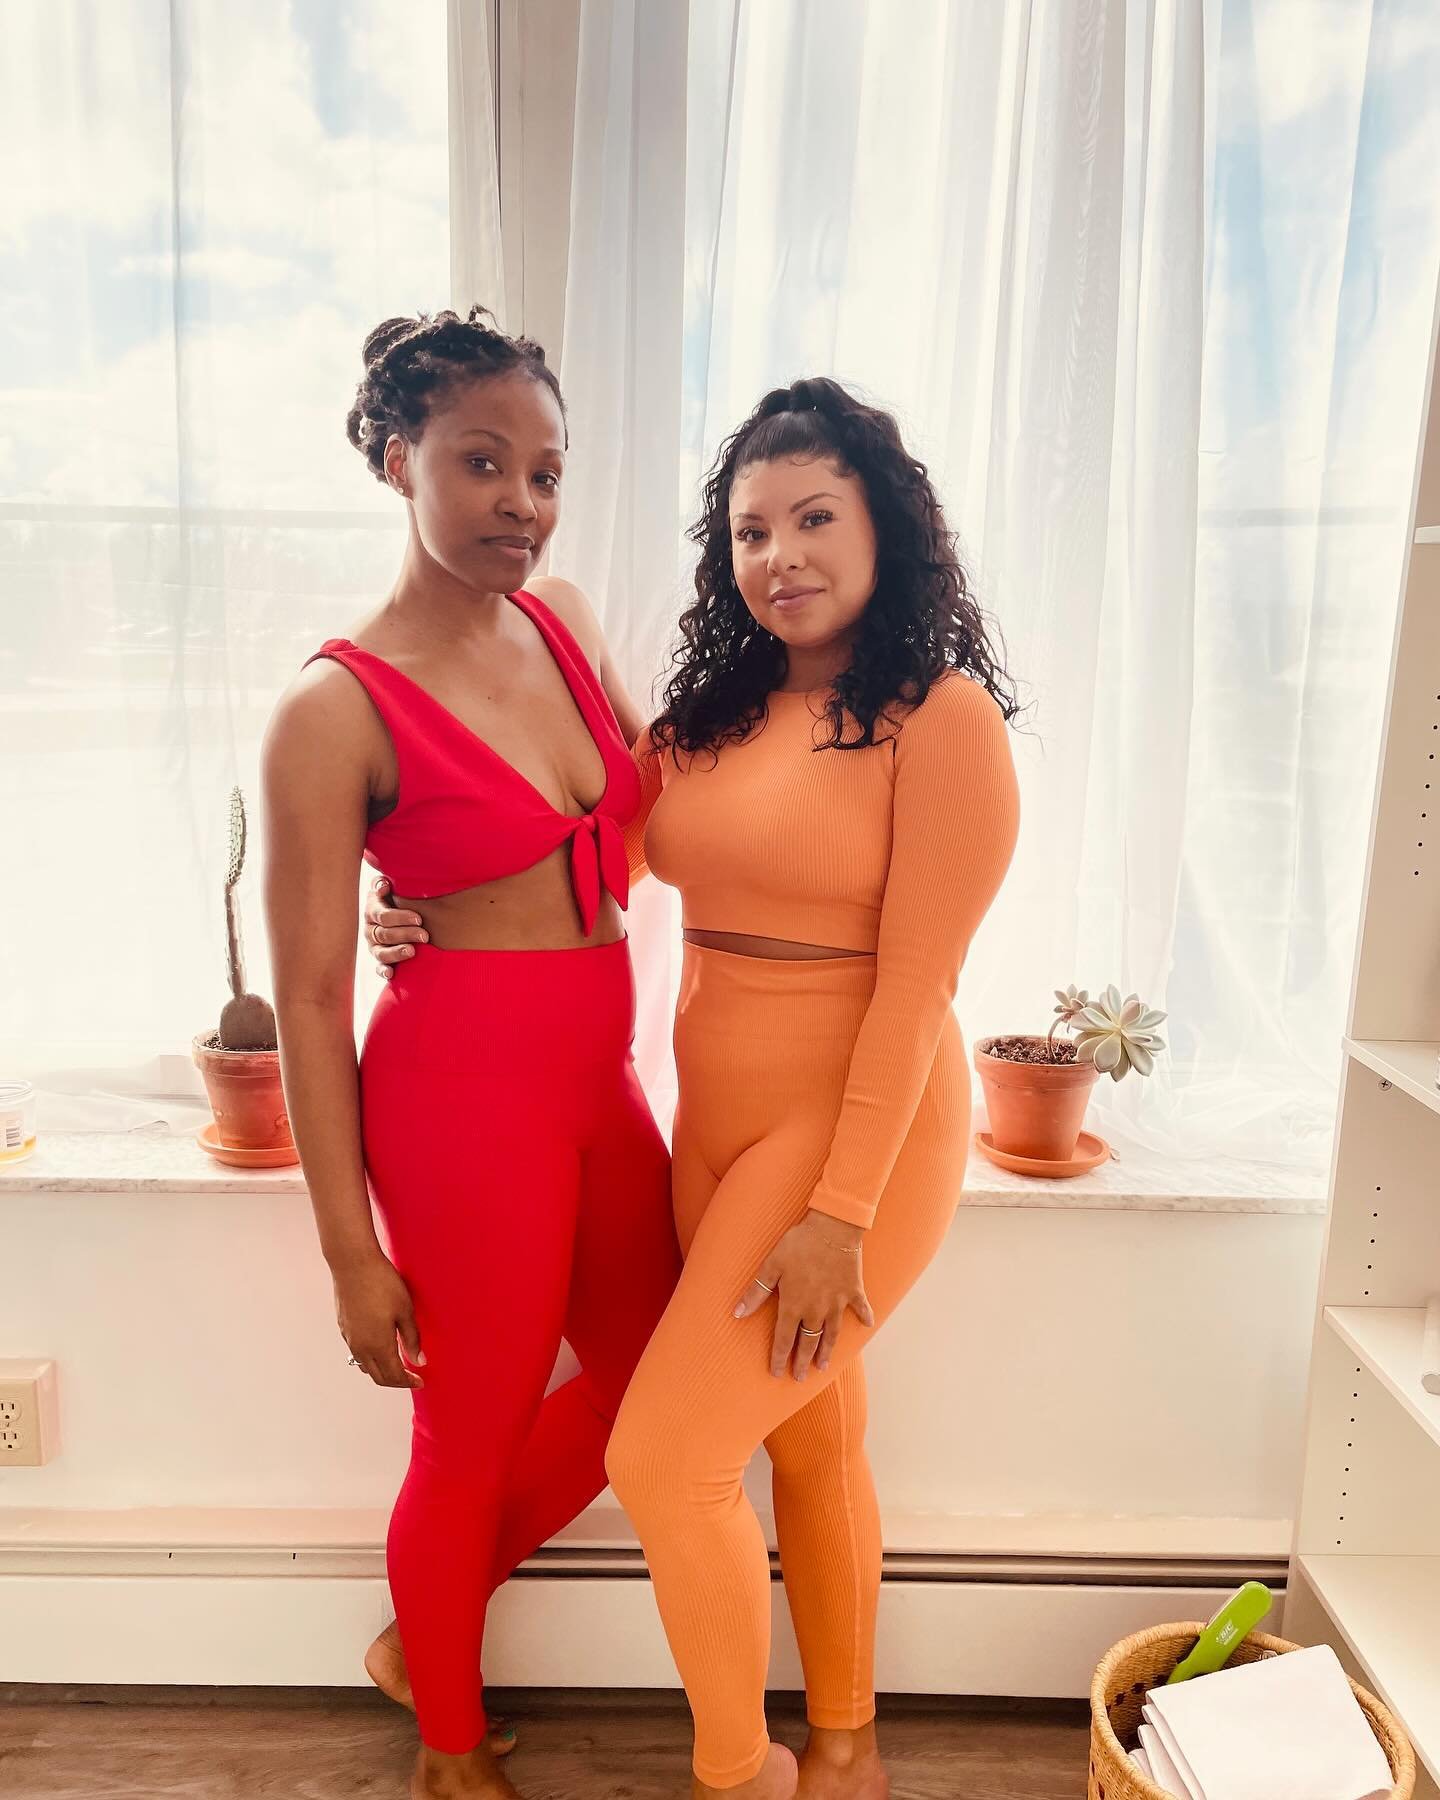 Join our special guests Jessica @tenacious.femme + Tasha @tashakelker Sunday, May 19th at 1-2:15pm for @soft_cycle! 

Prepare to nurture yourself during your menstrual cycle. They&rsquo;ll lead you through a restorative yoga session, complemented by 